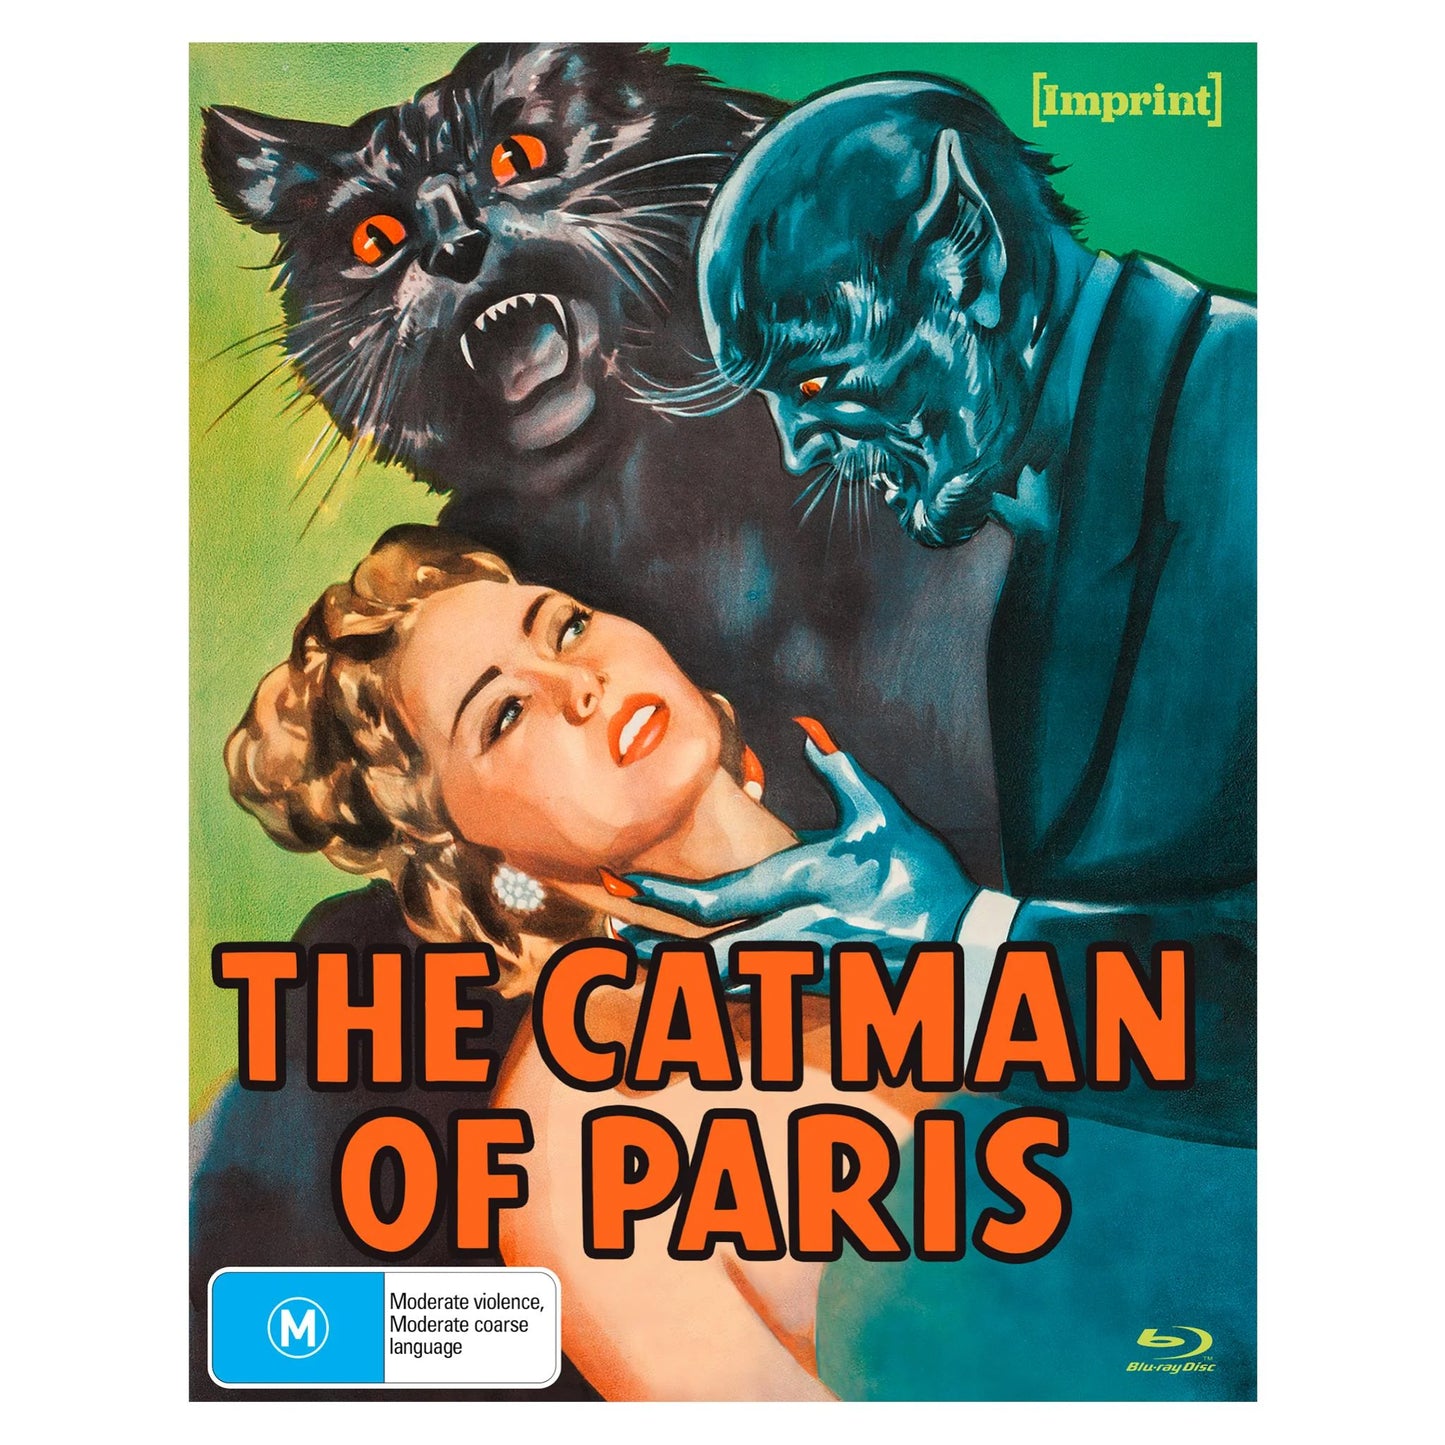 The Catman of Paris (Imprint #219 Special Edition) Blu-Ray